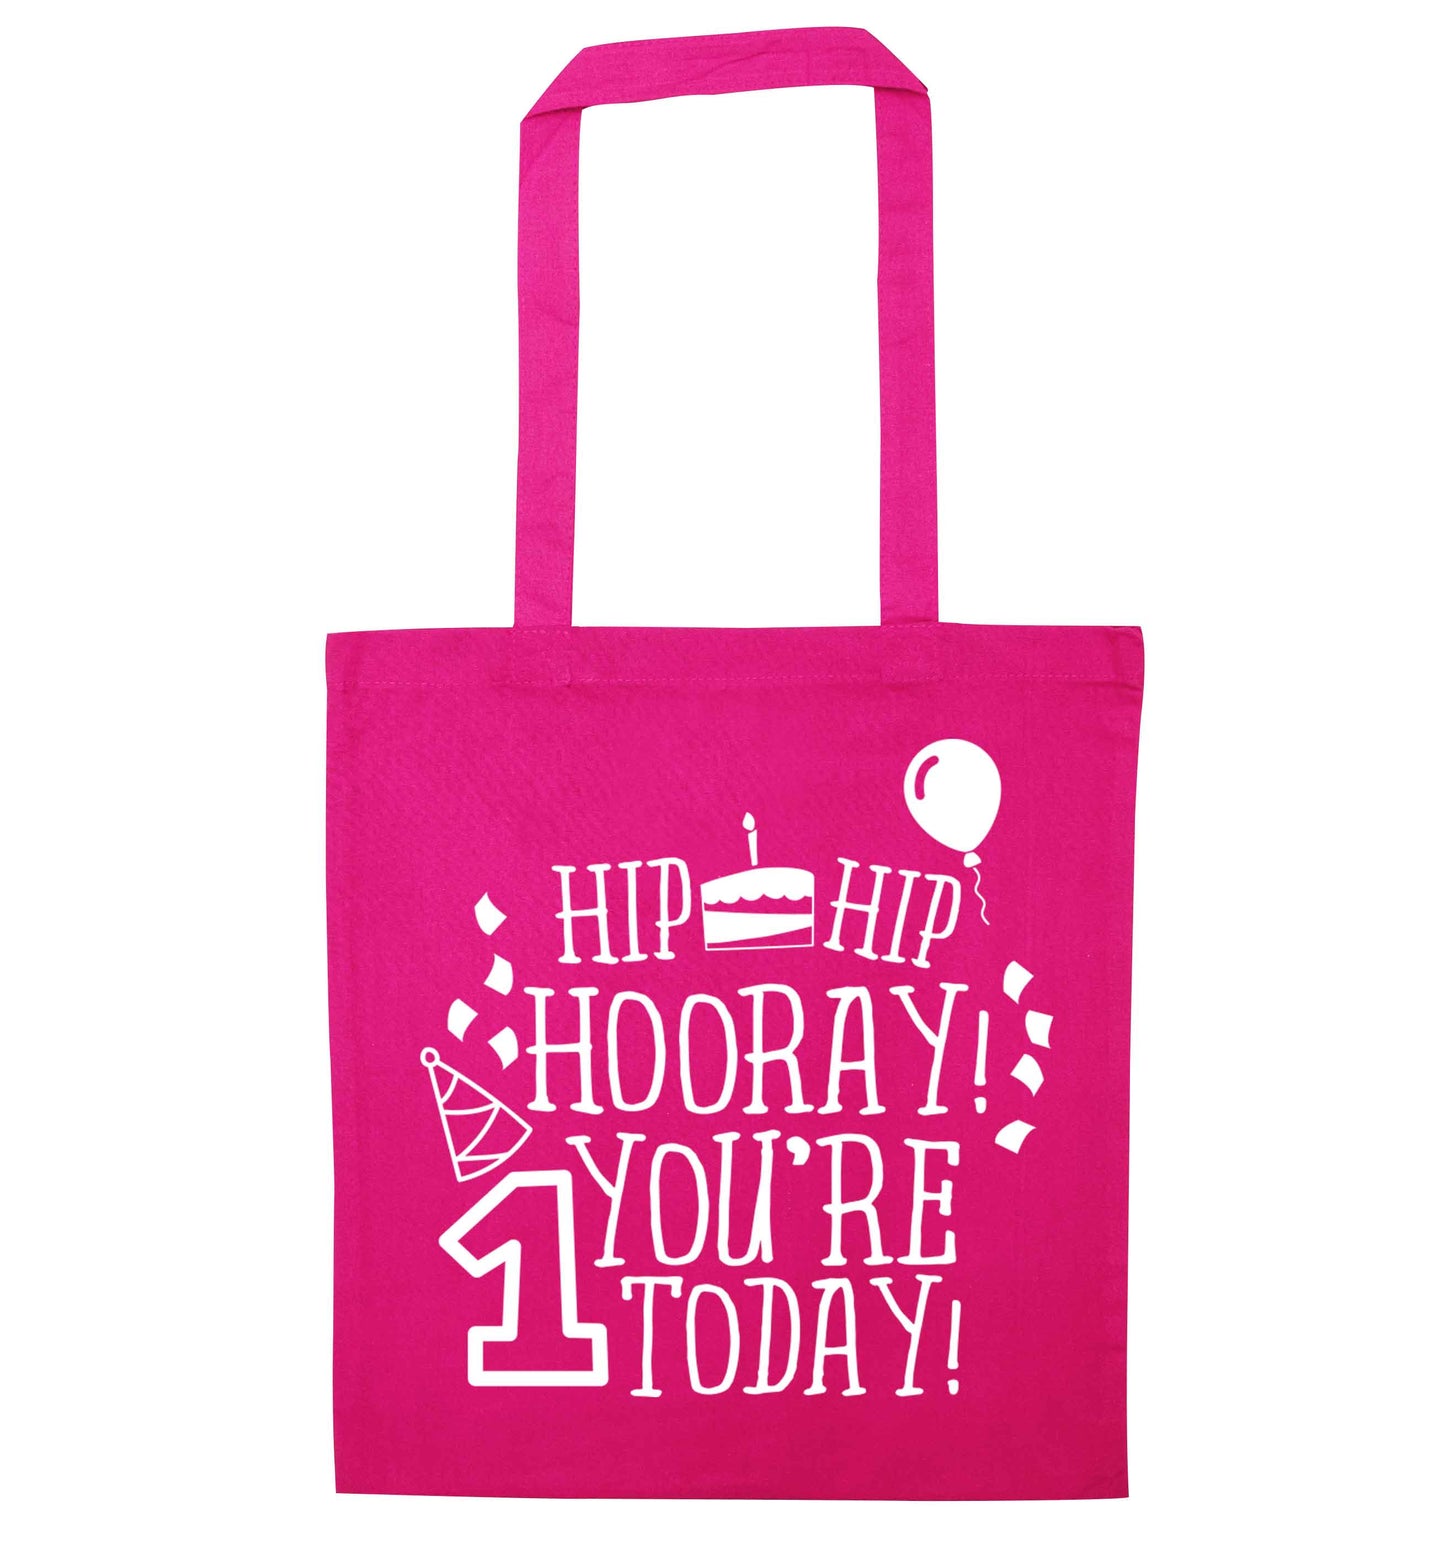 You're one today pink tote bag